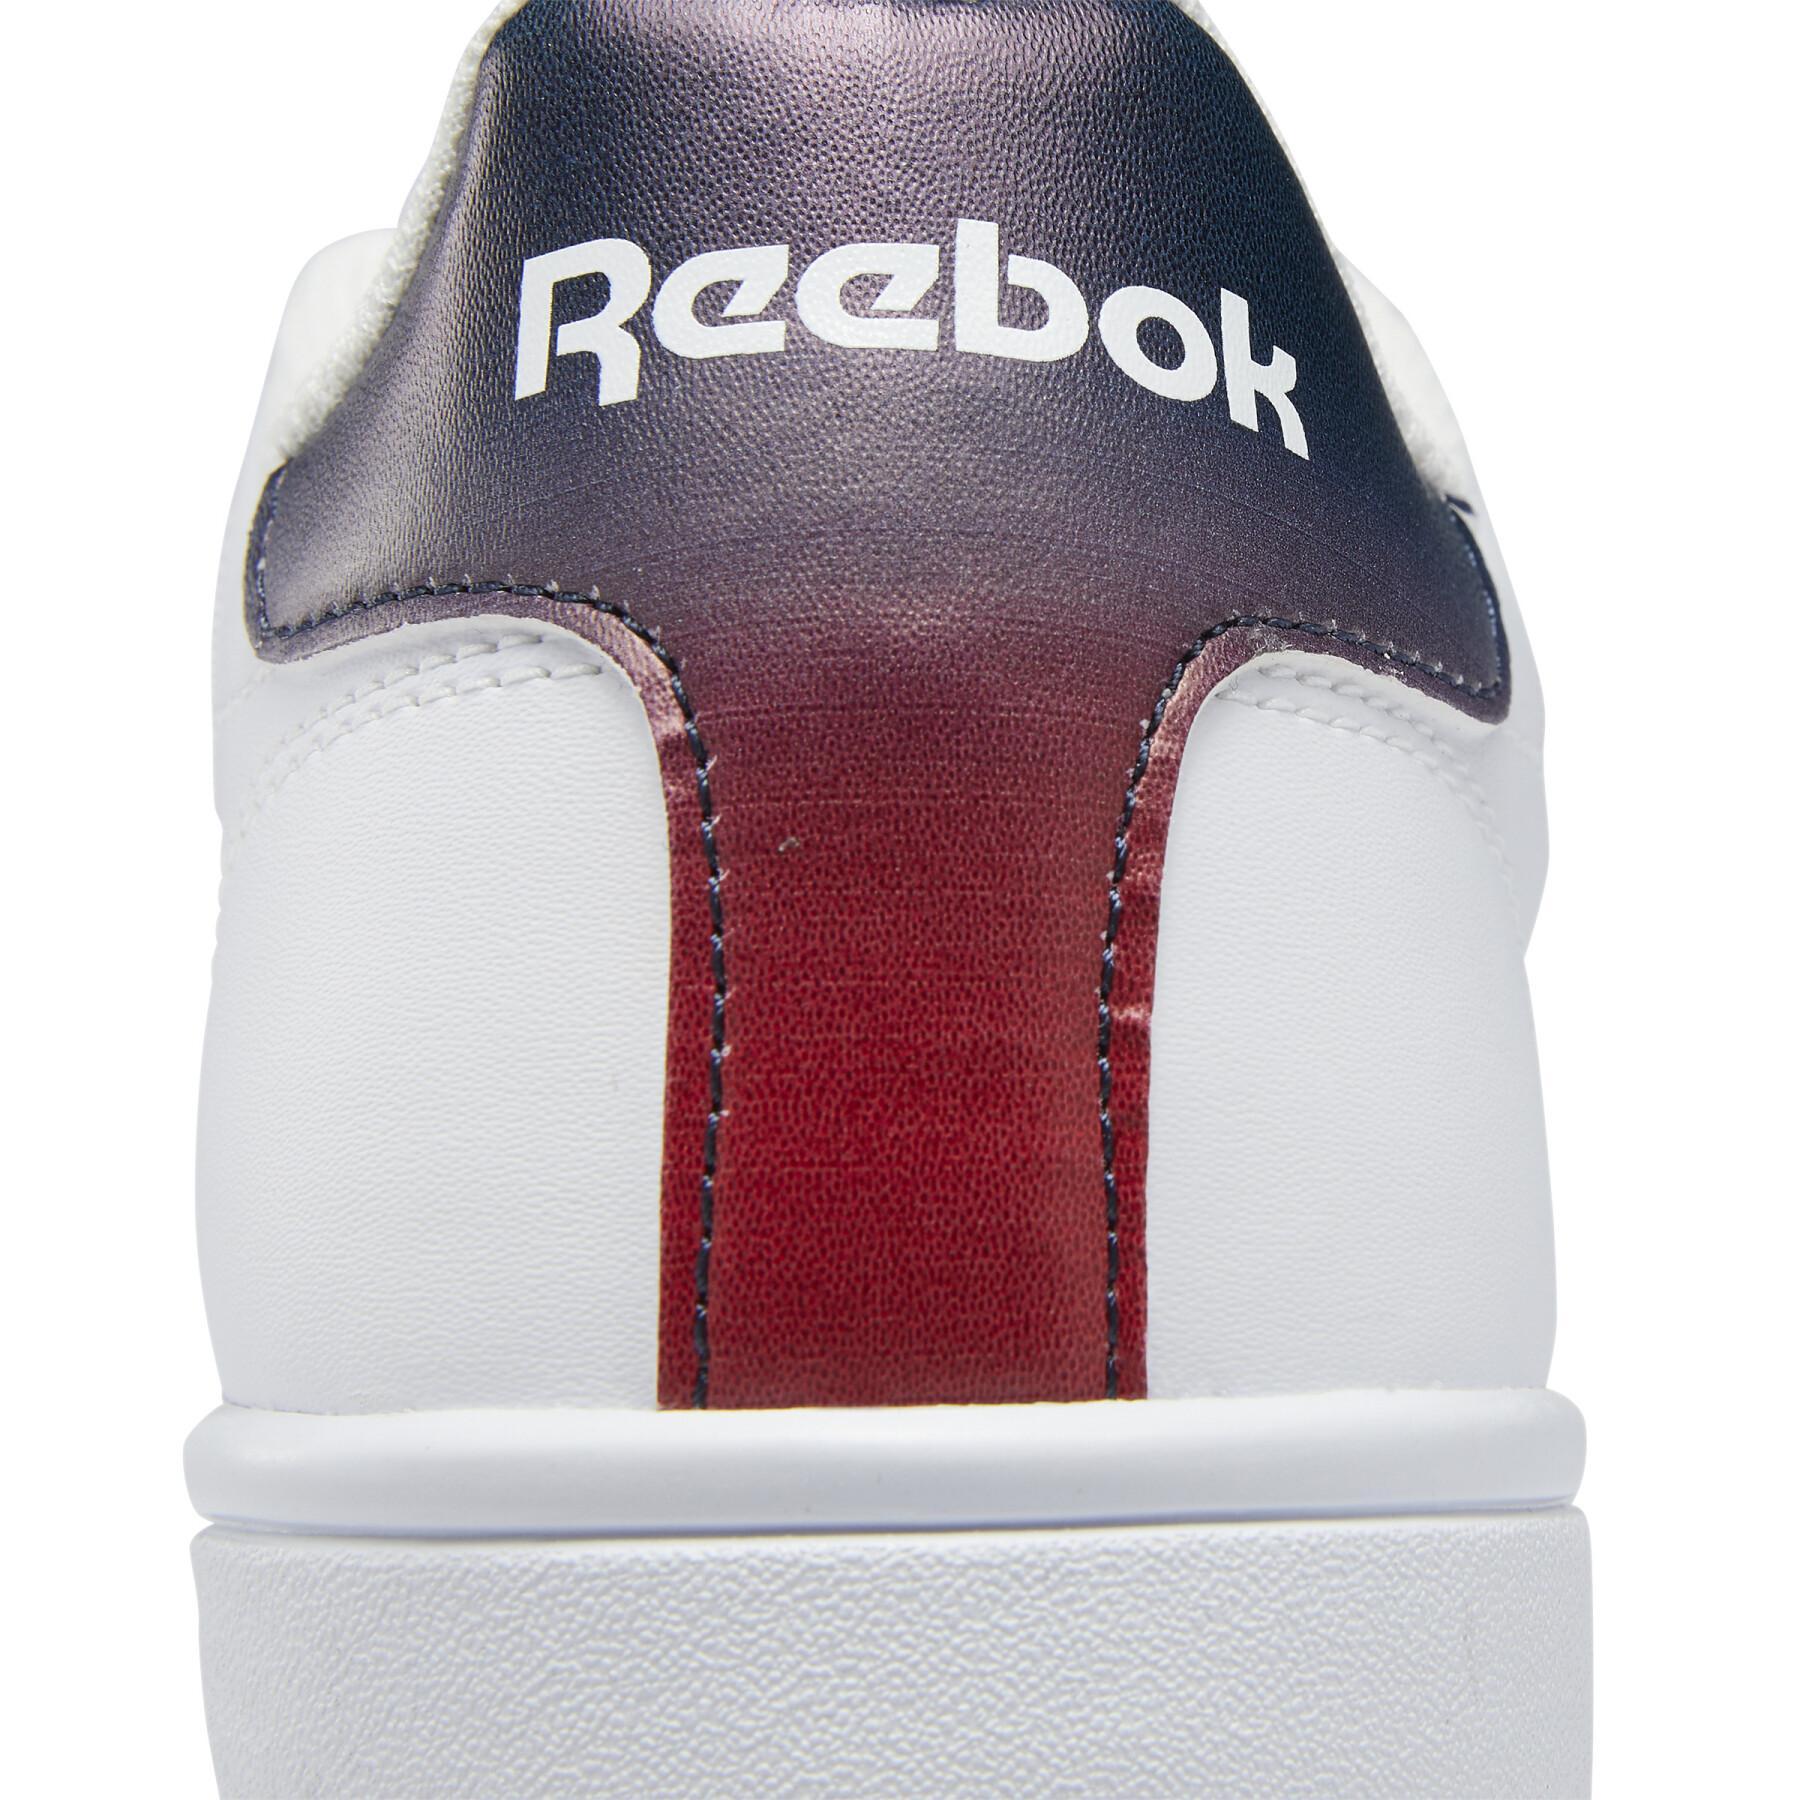 Trainers Reebok Royal Complete Clean 2.0